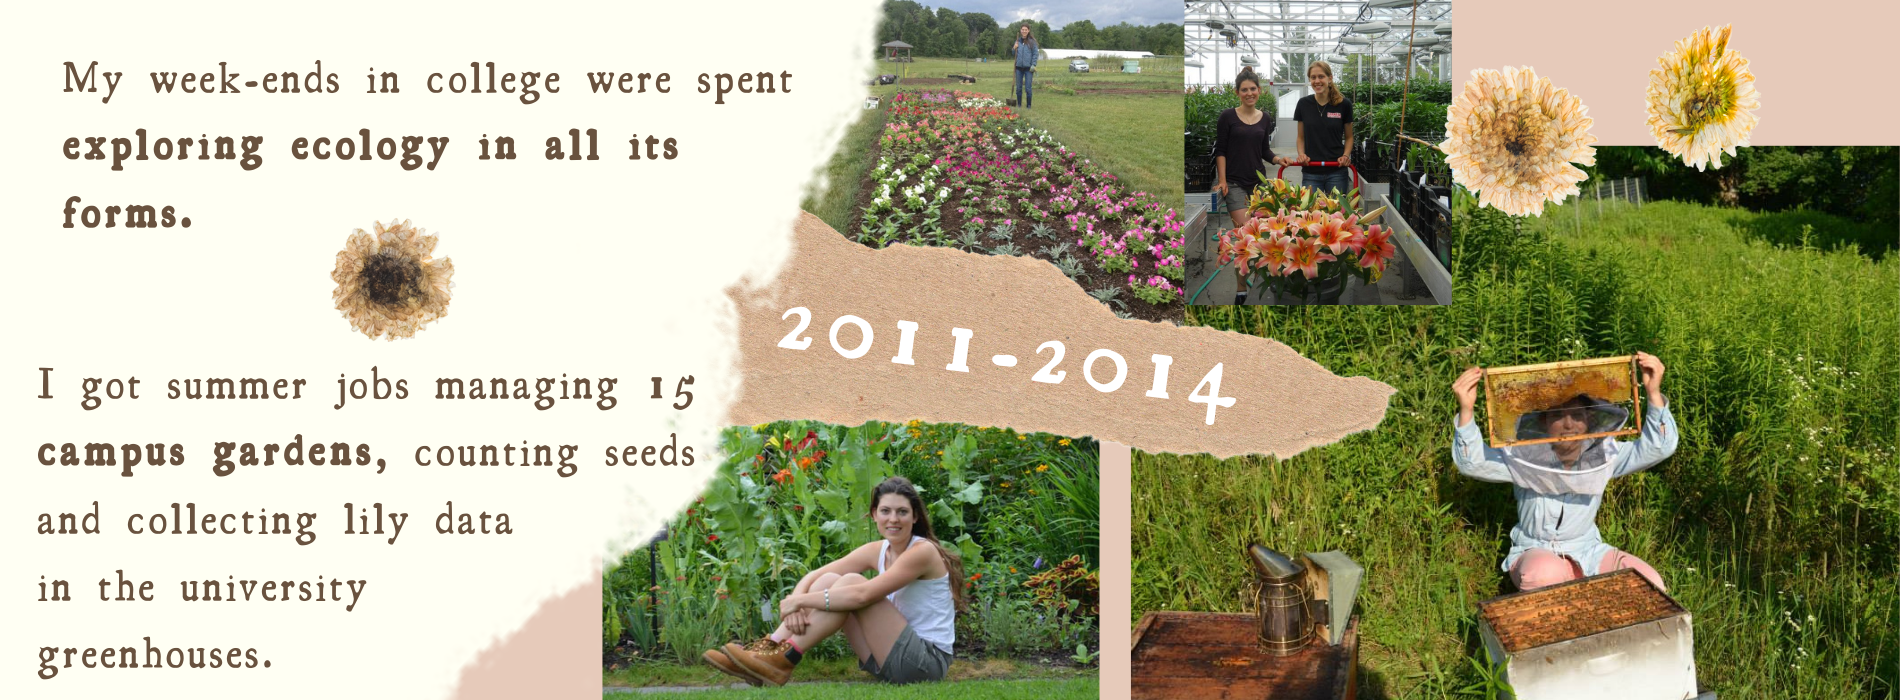 2011-2014 My week-ends in college were spent exploring ecology in all its forms. I got summer jobs managing 15 campus gardens, counting seeds and collecting lily data in the university greenhouses.